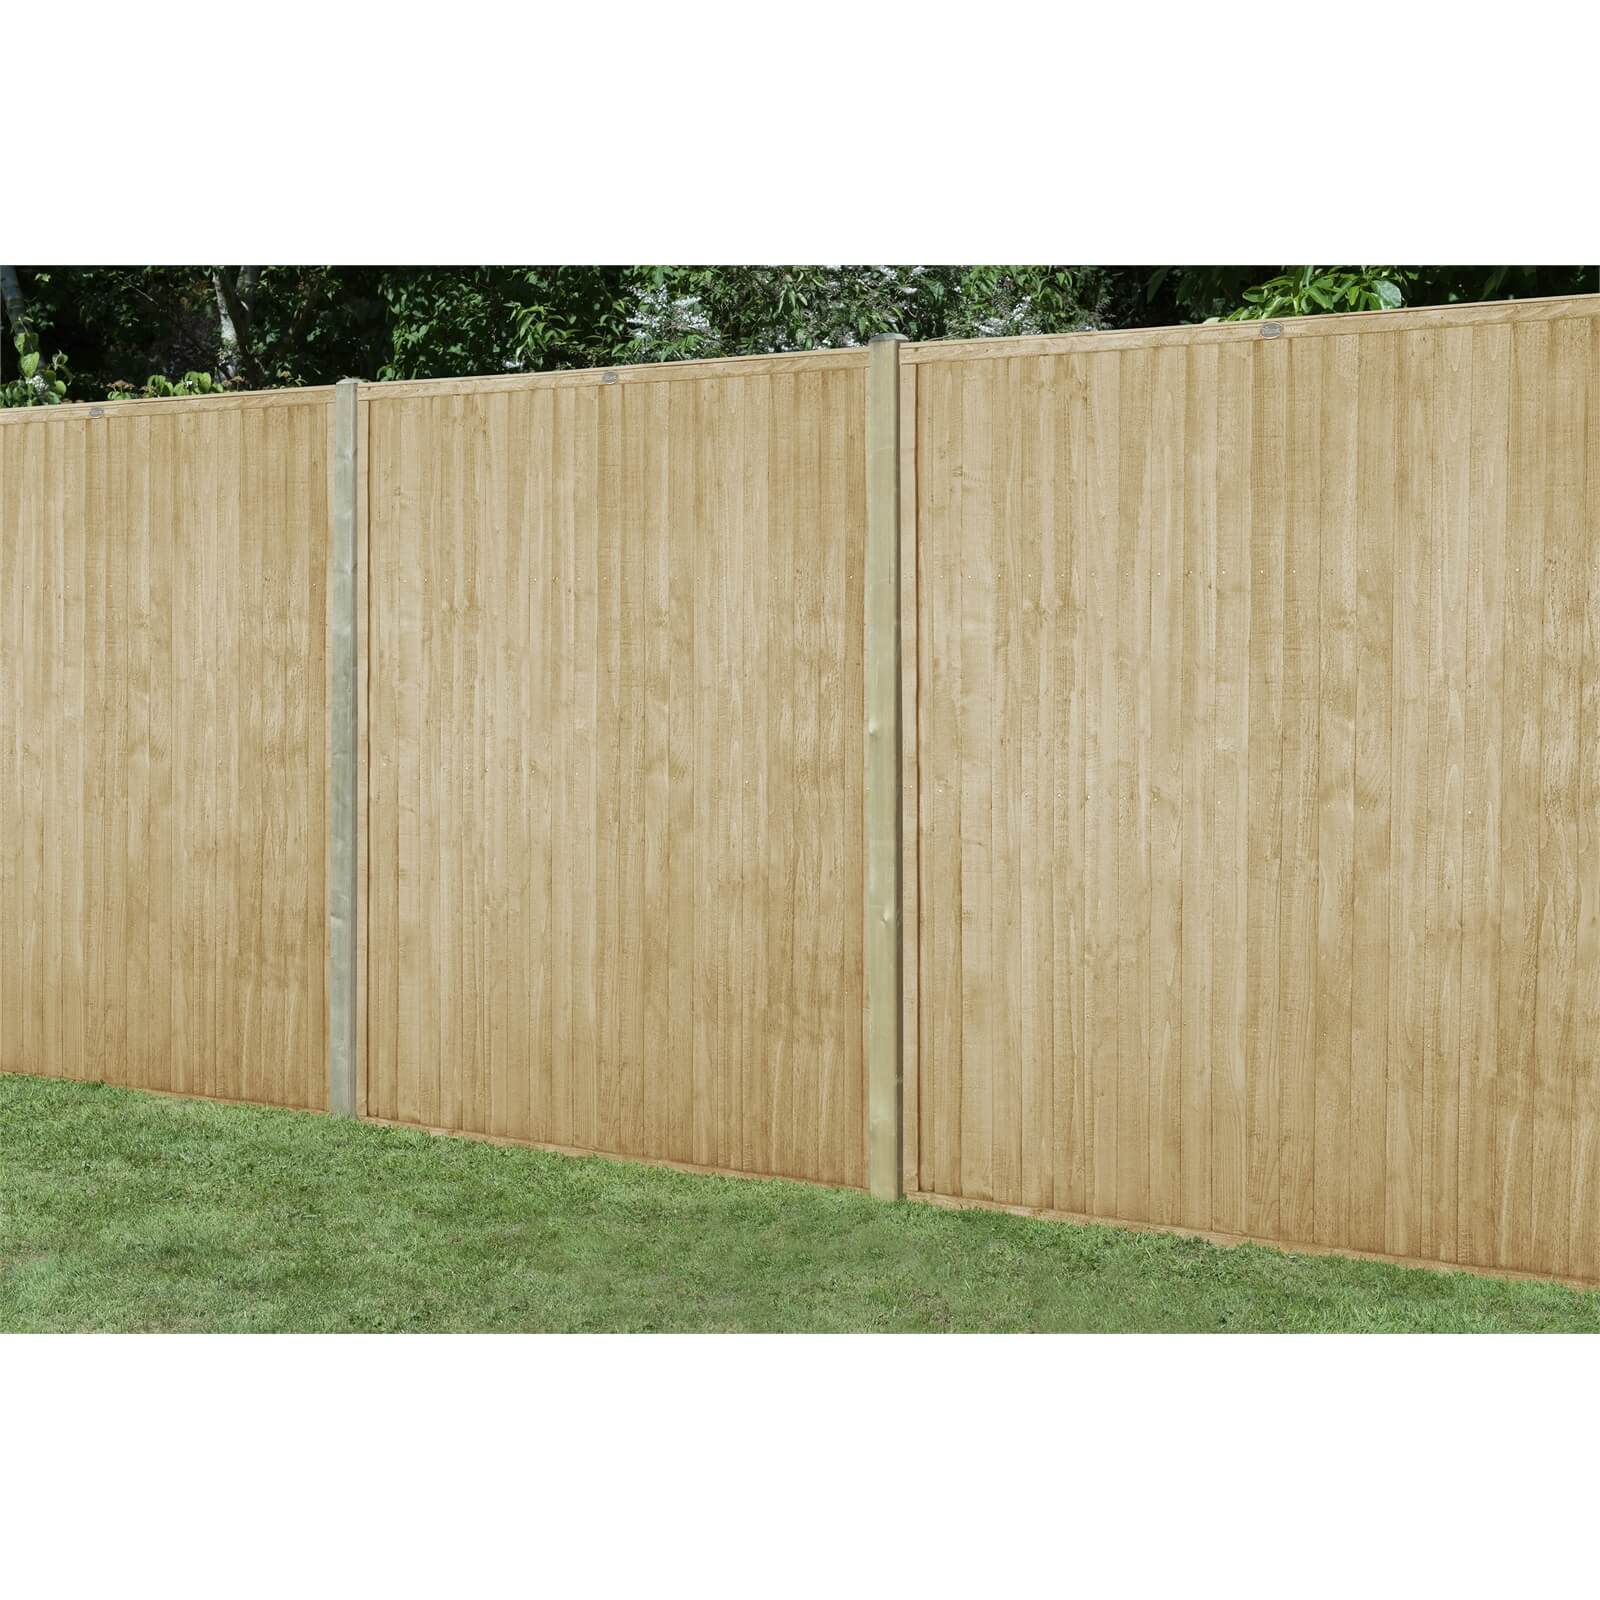 6ft x 6ft (1.83m x 1.83m) Pressure Treated Closeboard Fence Panel - Pack of 20